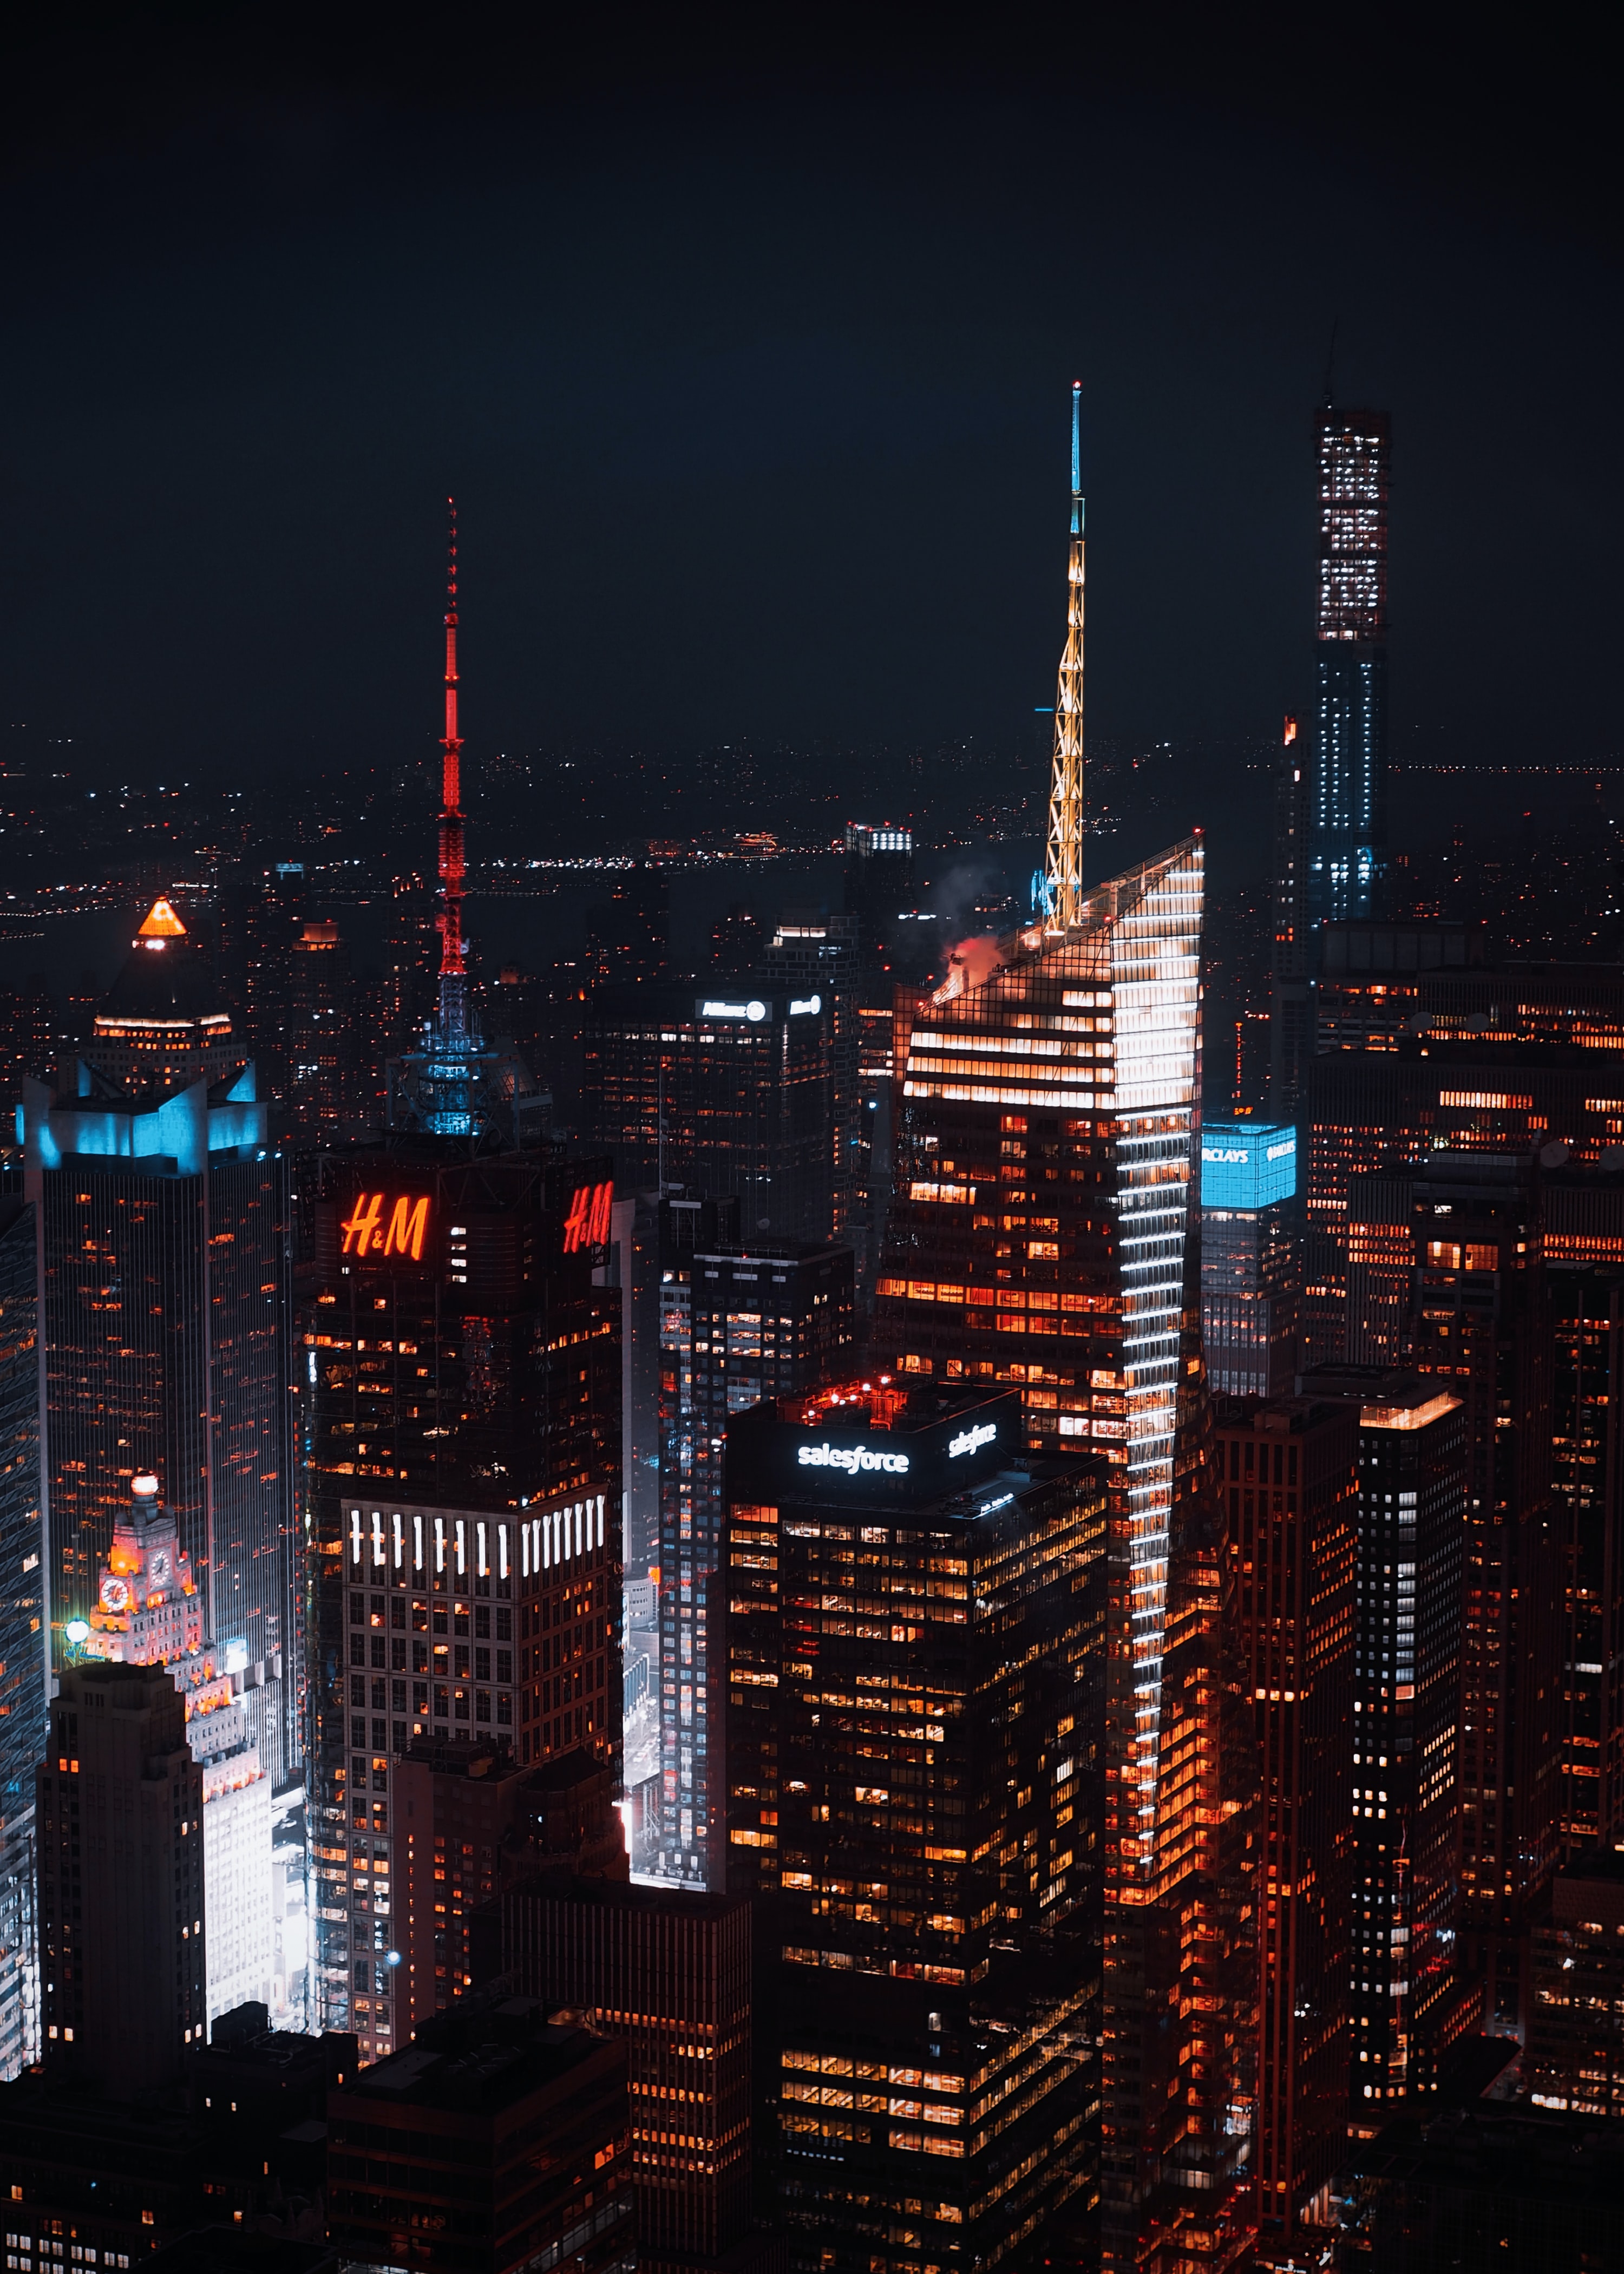 Download background architecture, cities, night, city, building, view from above, skyscrapers